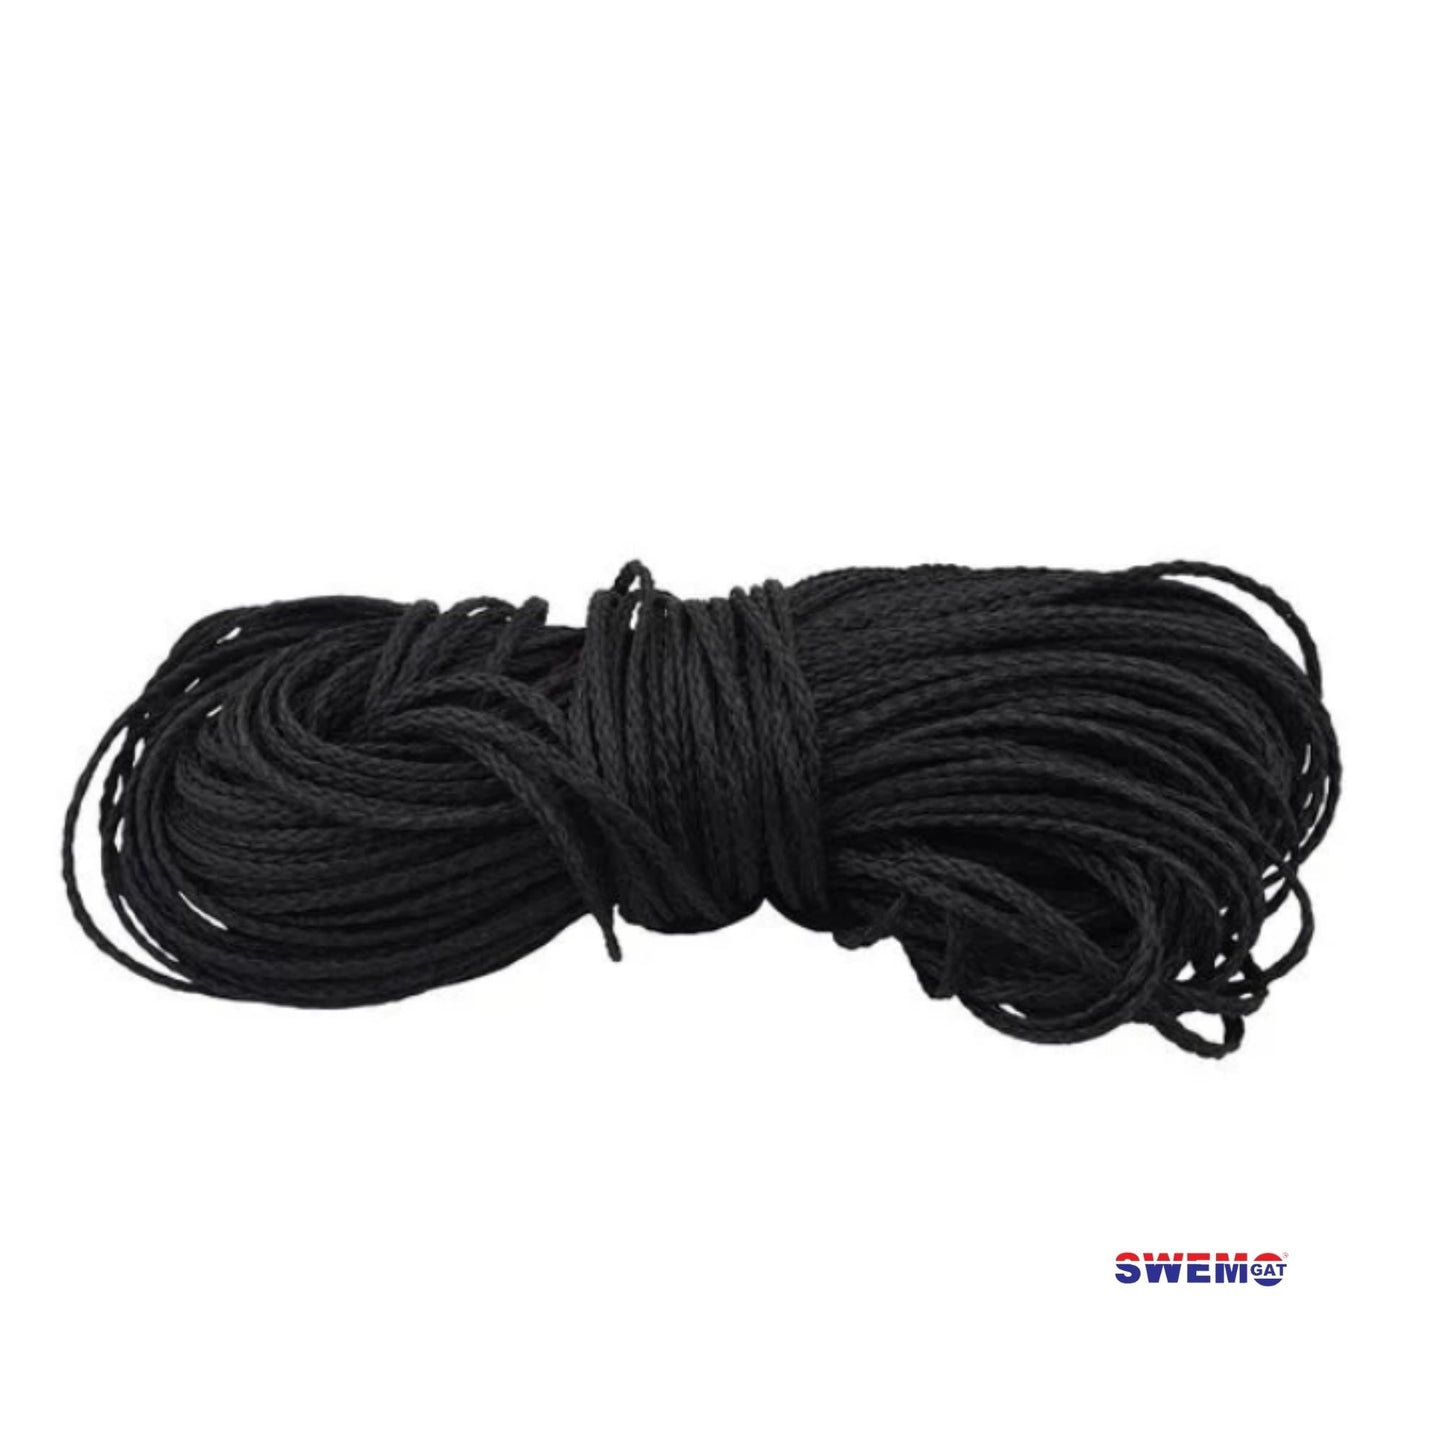 Black ski rope 10m for panel for tie-down